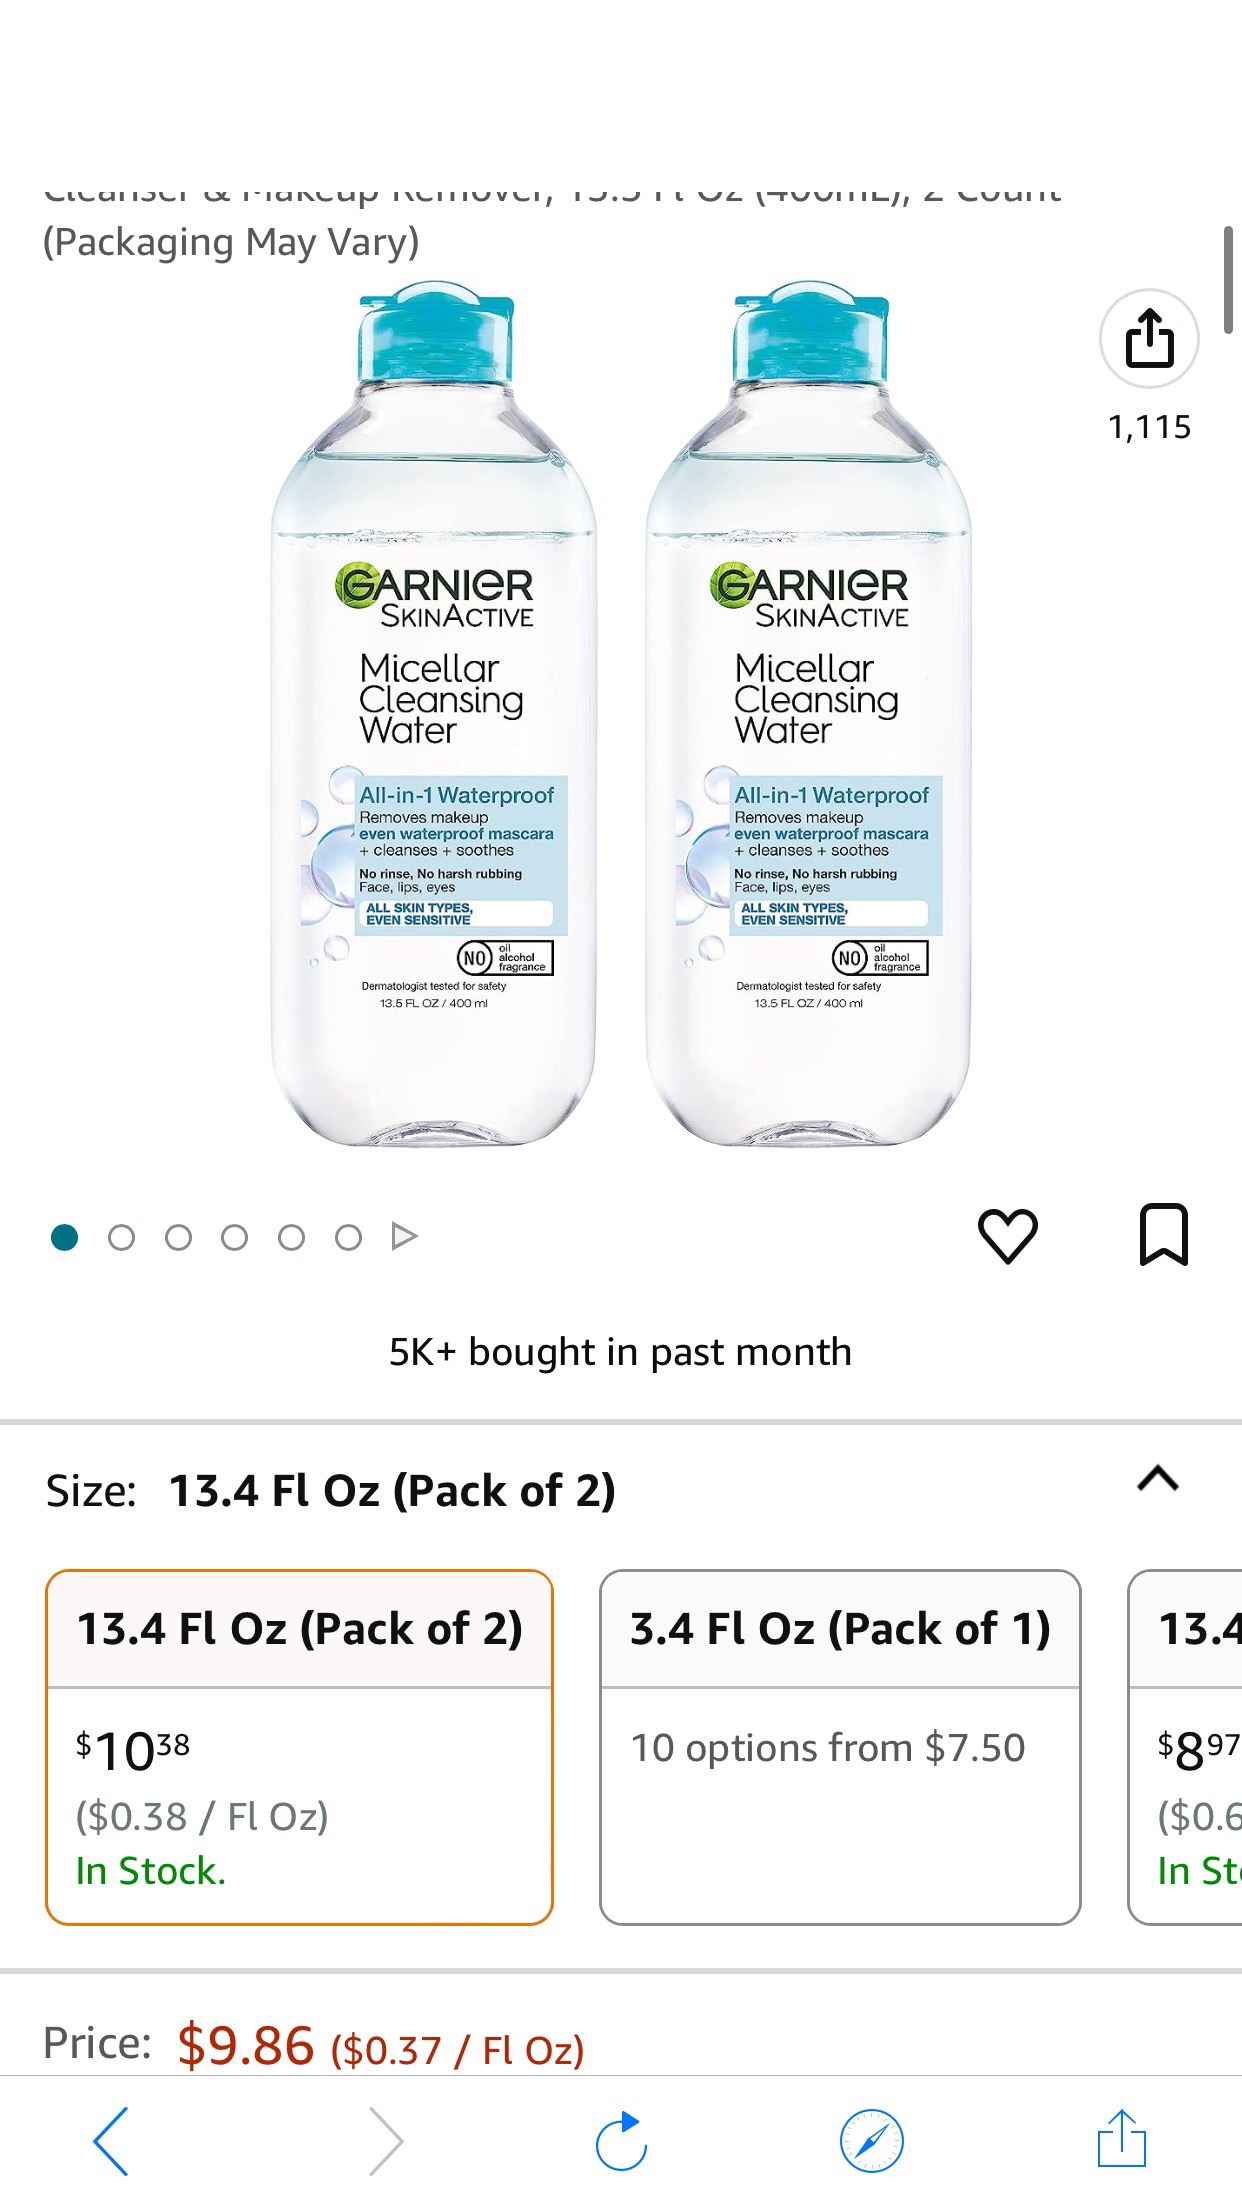 Amazon.com: Garnier SkinActive Micellar Water For Waterproof Makeup, Facial Cleanser & Makeup Remover, 13.5 Fl Oz (400mL), 2 Count (Packaging May Vary) : Beauty & Personal Care